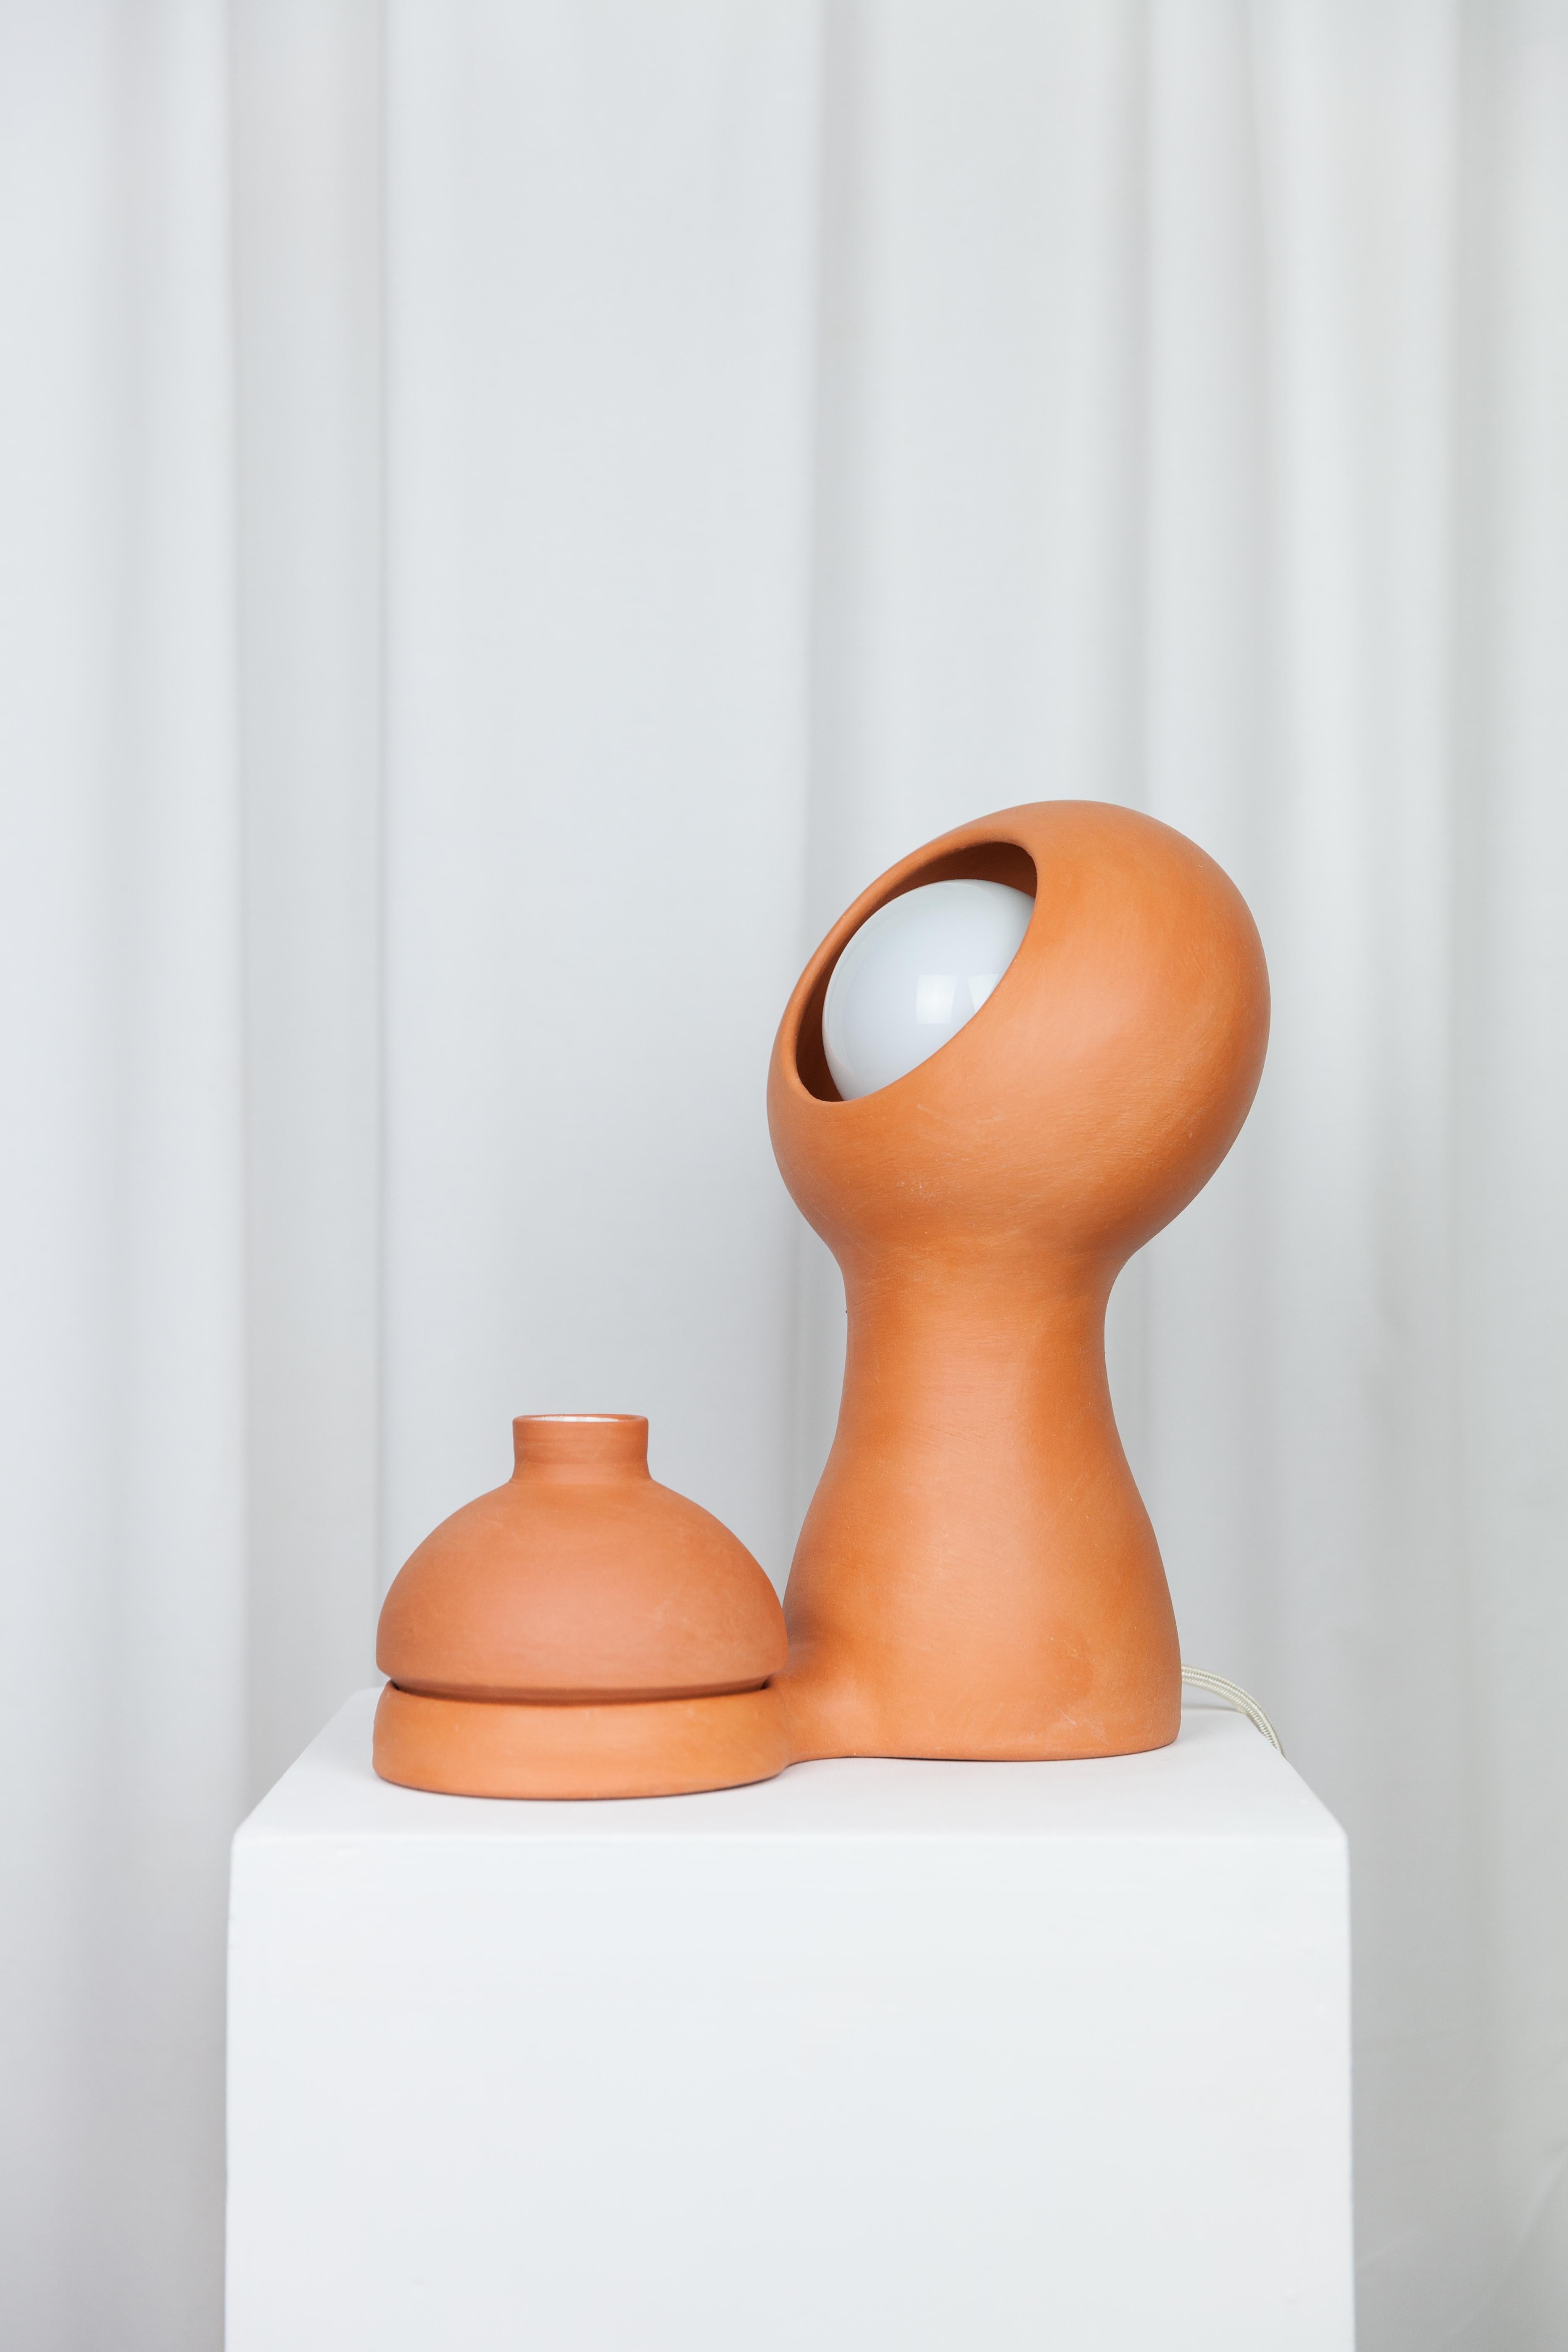 Glob Terracotta lamp + vase by Lola Mayeras
Dimensions: D29 x W 18 x W 32 cm
Materials: Earthenware.
Other colors available.

Lamp with detachable vase, white earthenware, glazed in beige.
This piece is designed and handcrafted in the south of